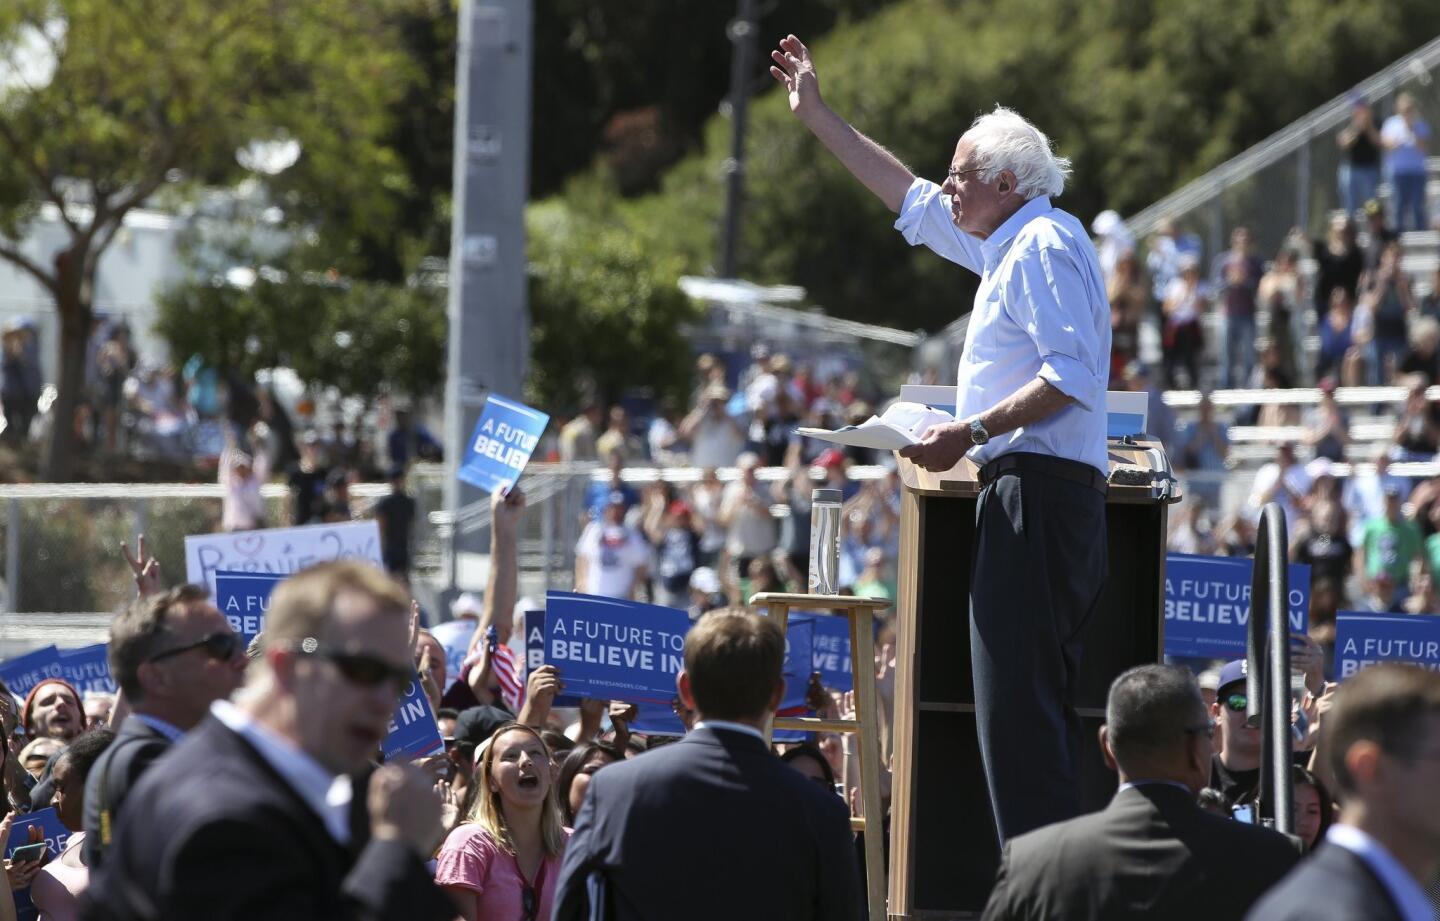 Democratic presidential candidate Bernie Sanders waves to the crowd at the conclusion of his speech.